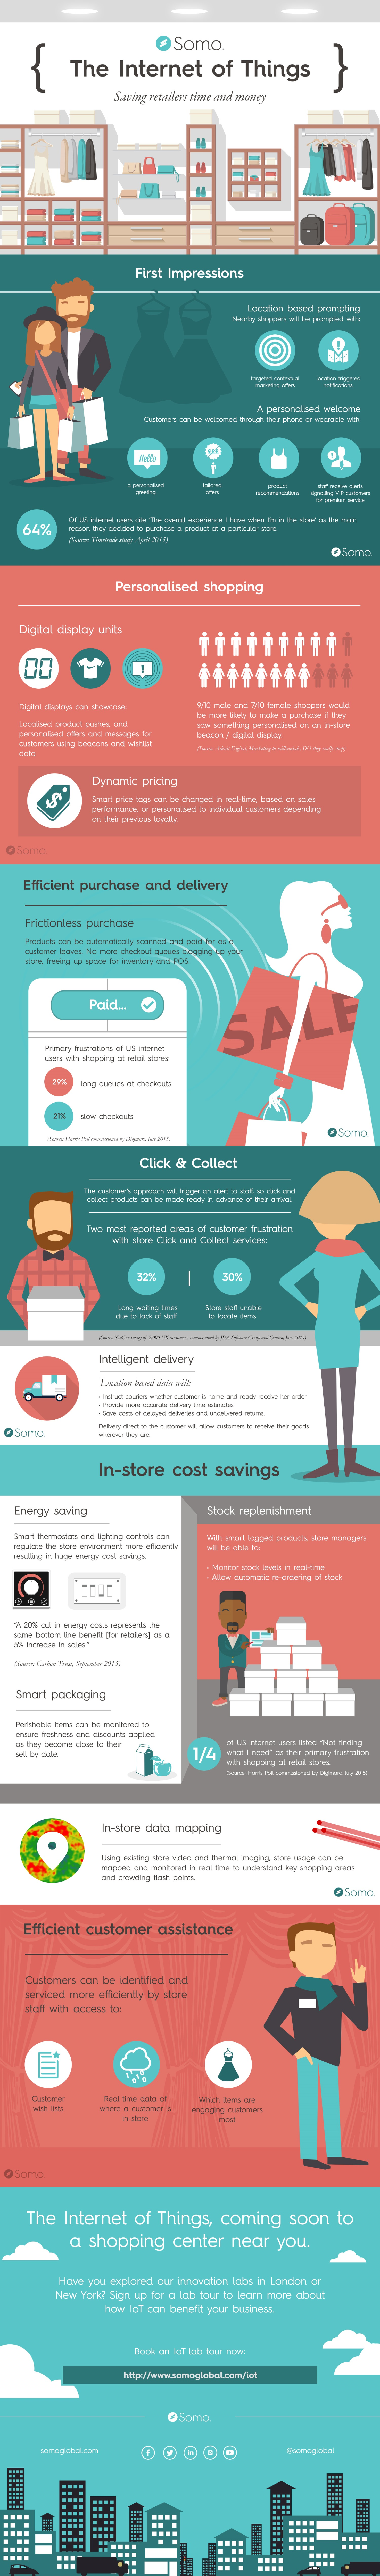 What Role Can IoT Play in Retail? (Infographic)